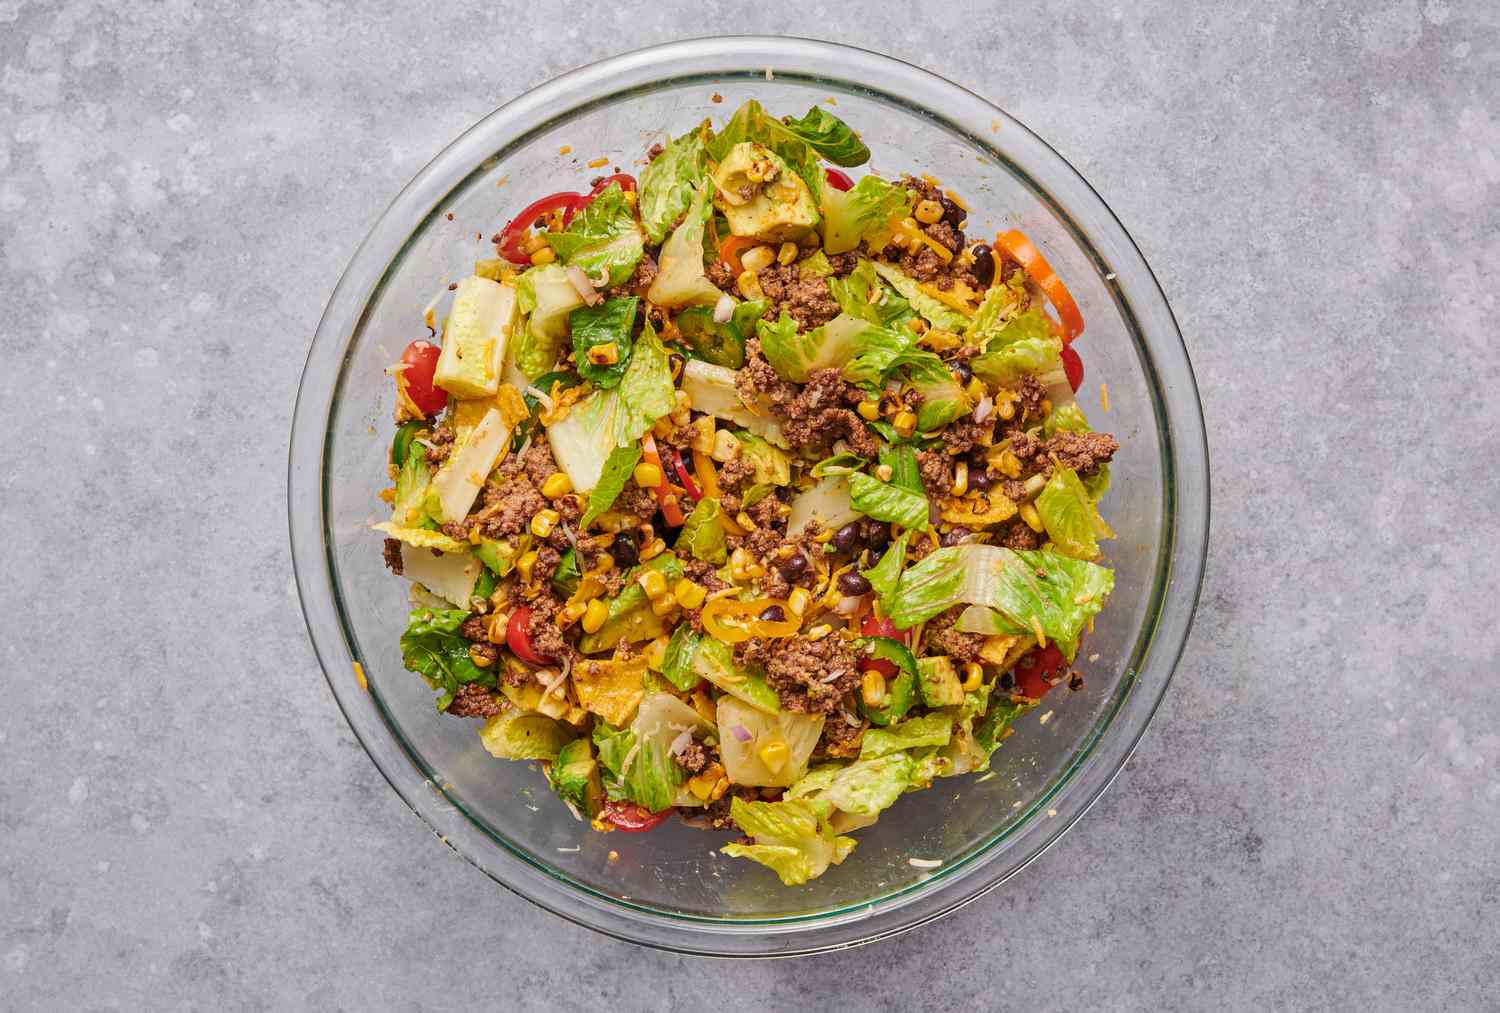 A large bowl of taco salad with cooked ground beef